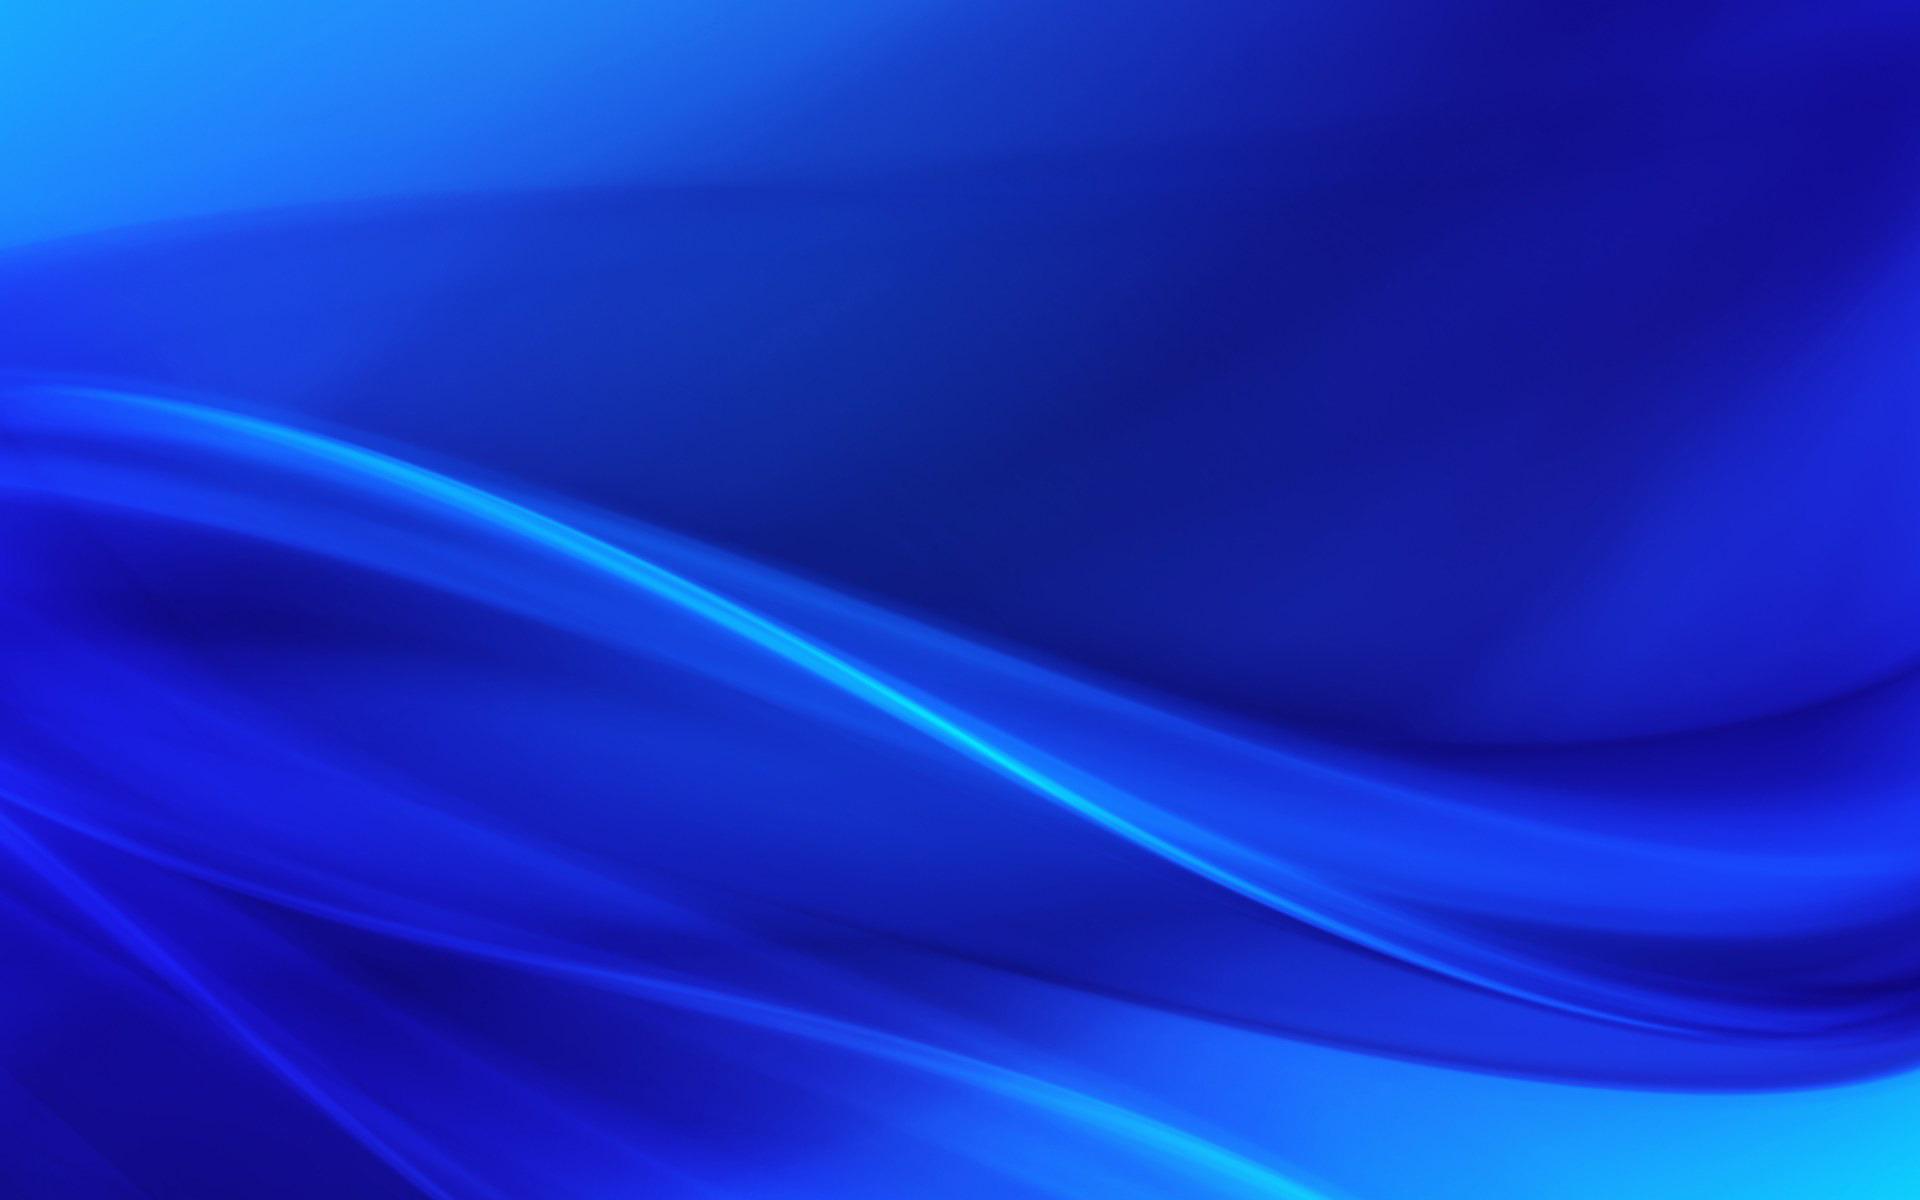 Simple Blue Waves Download PPT Backgrounds